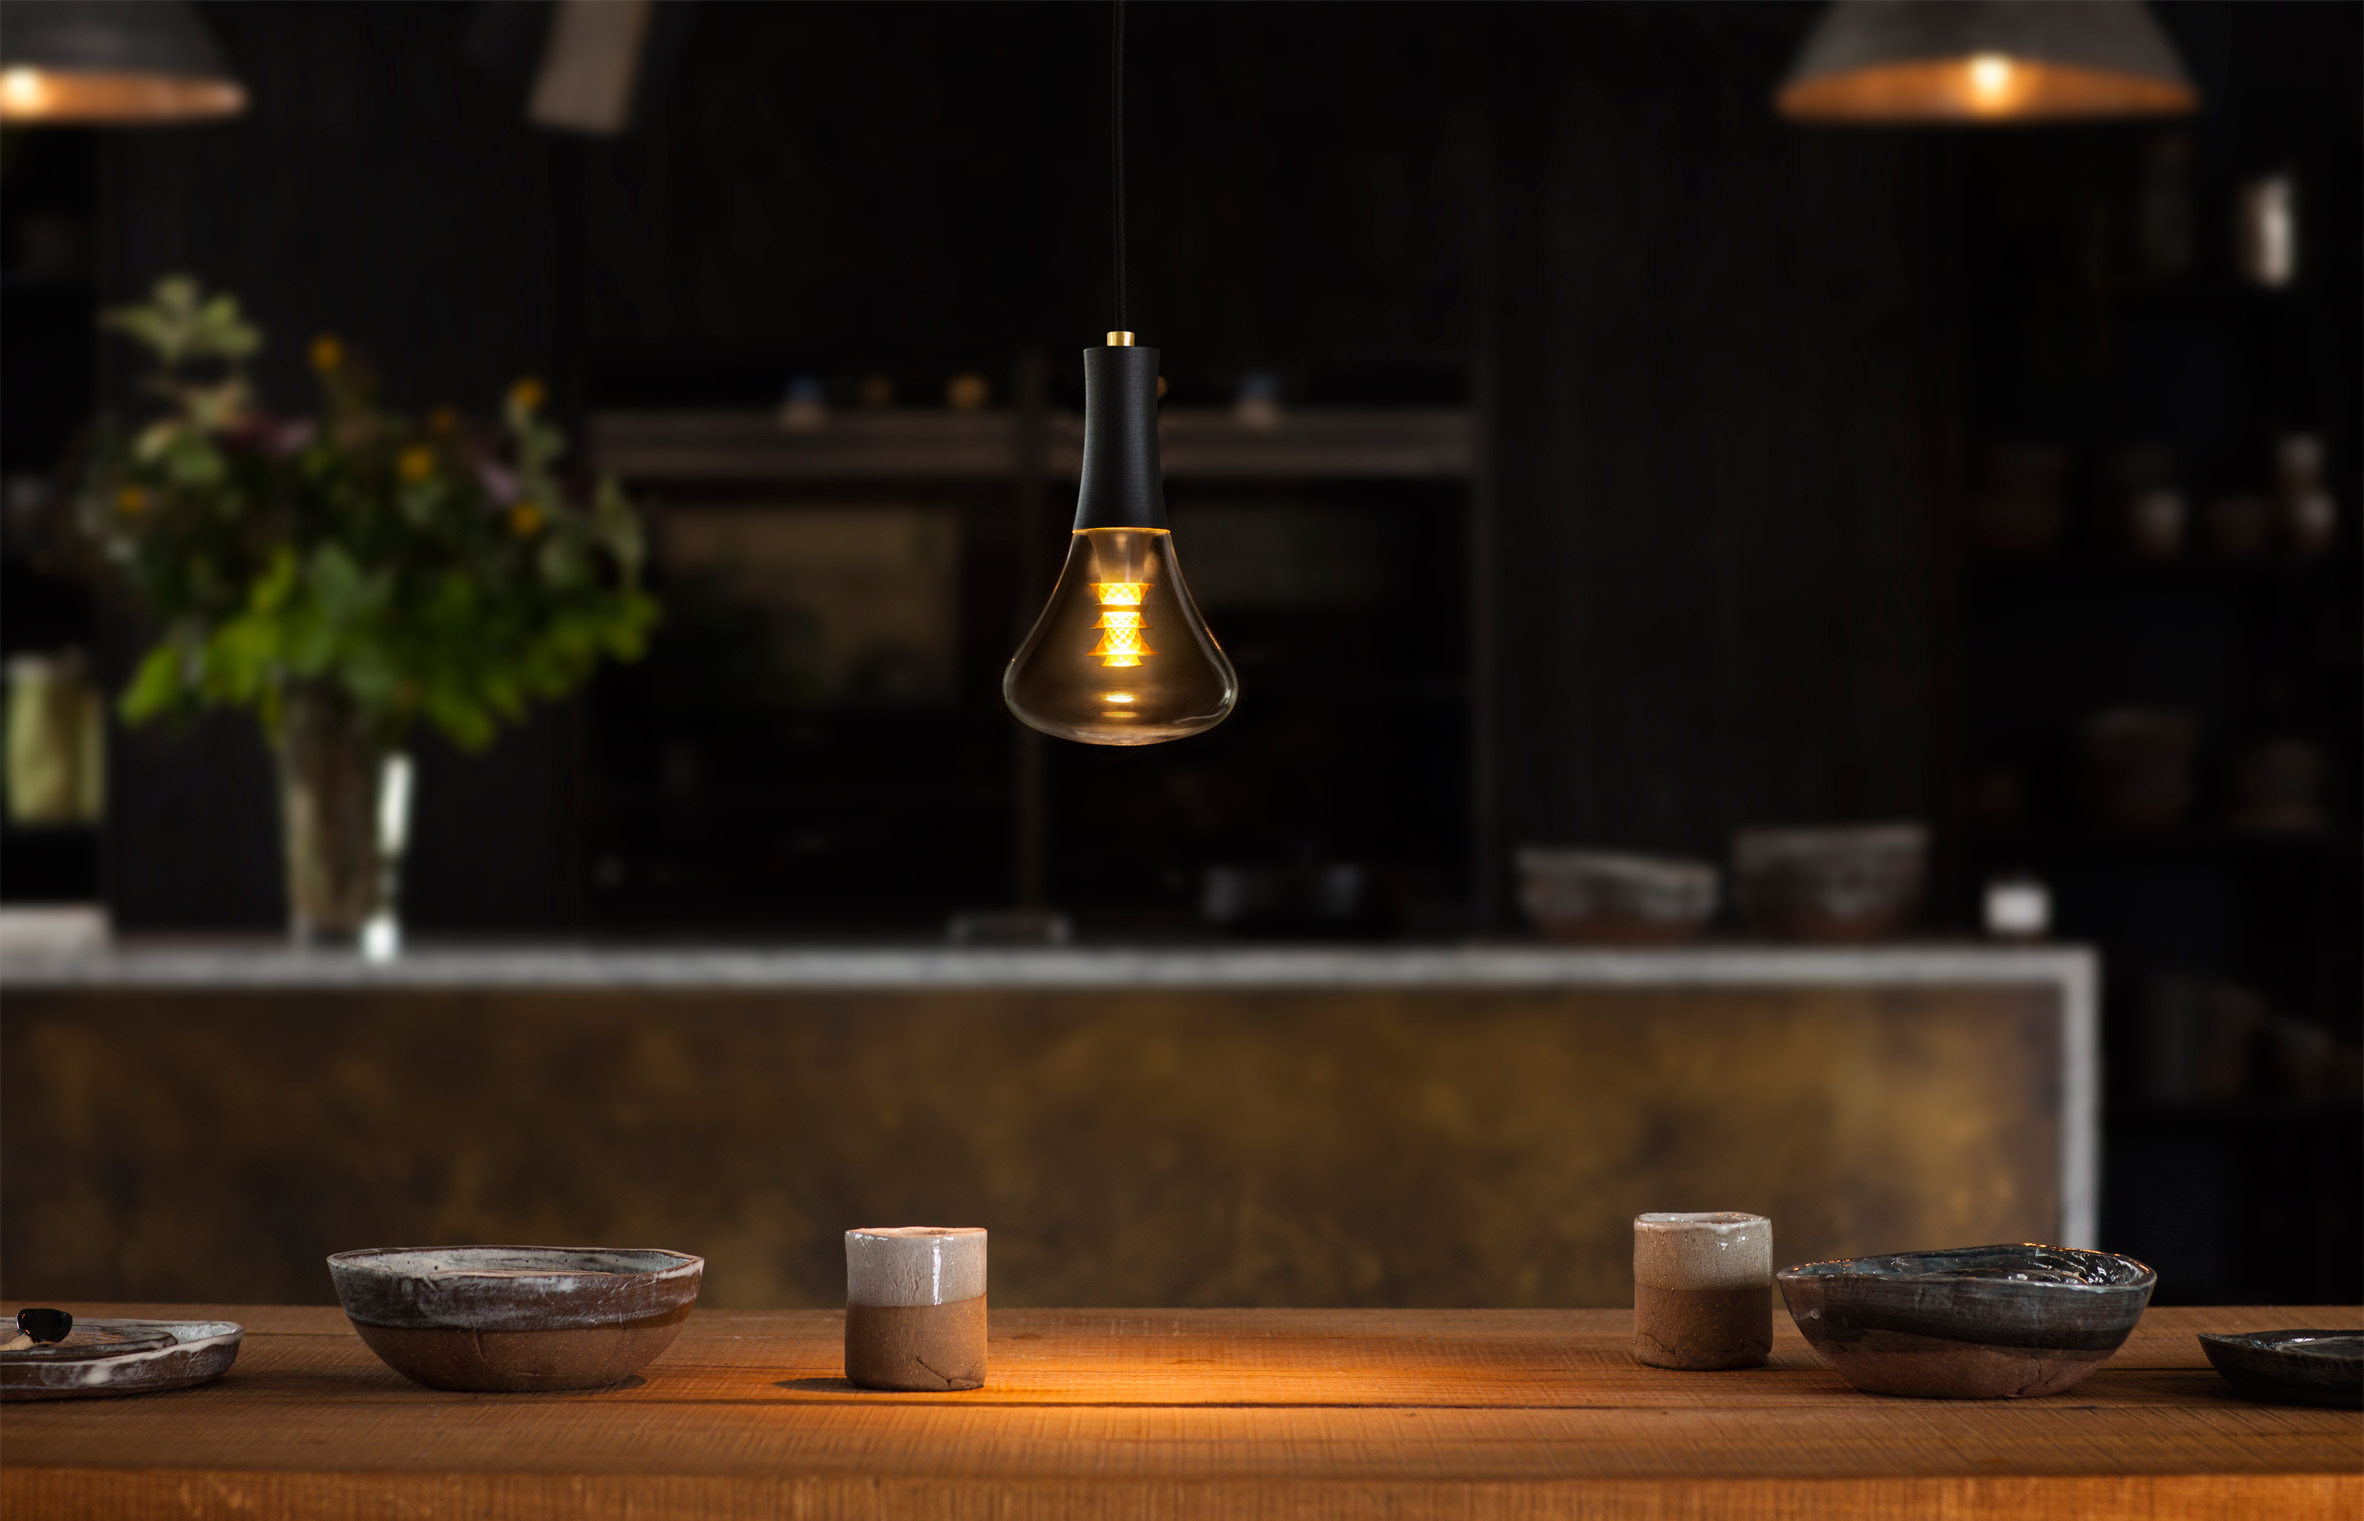 Plumen designs bulb with faceted gold internal shade